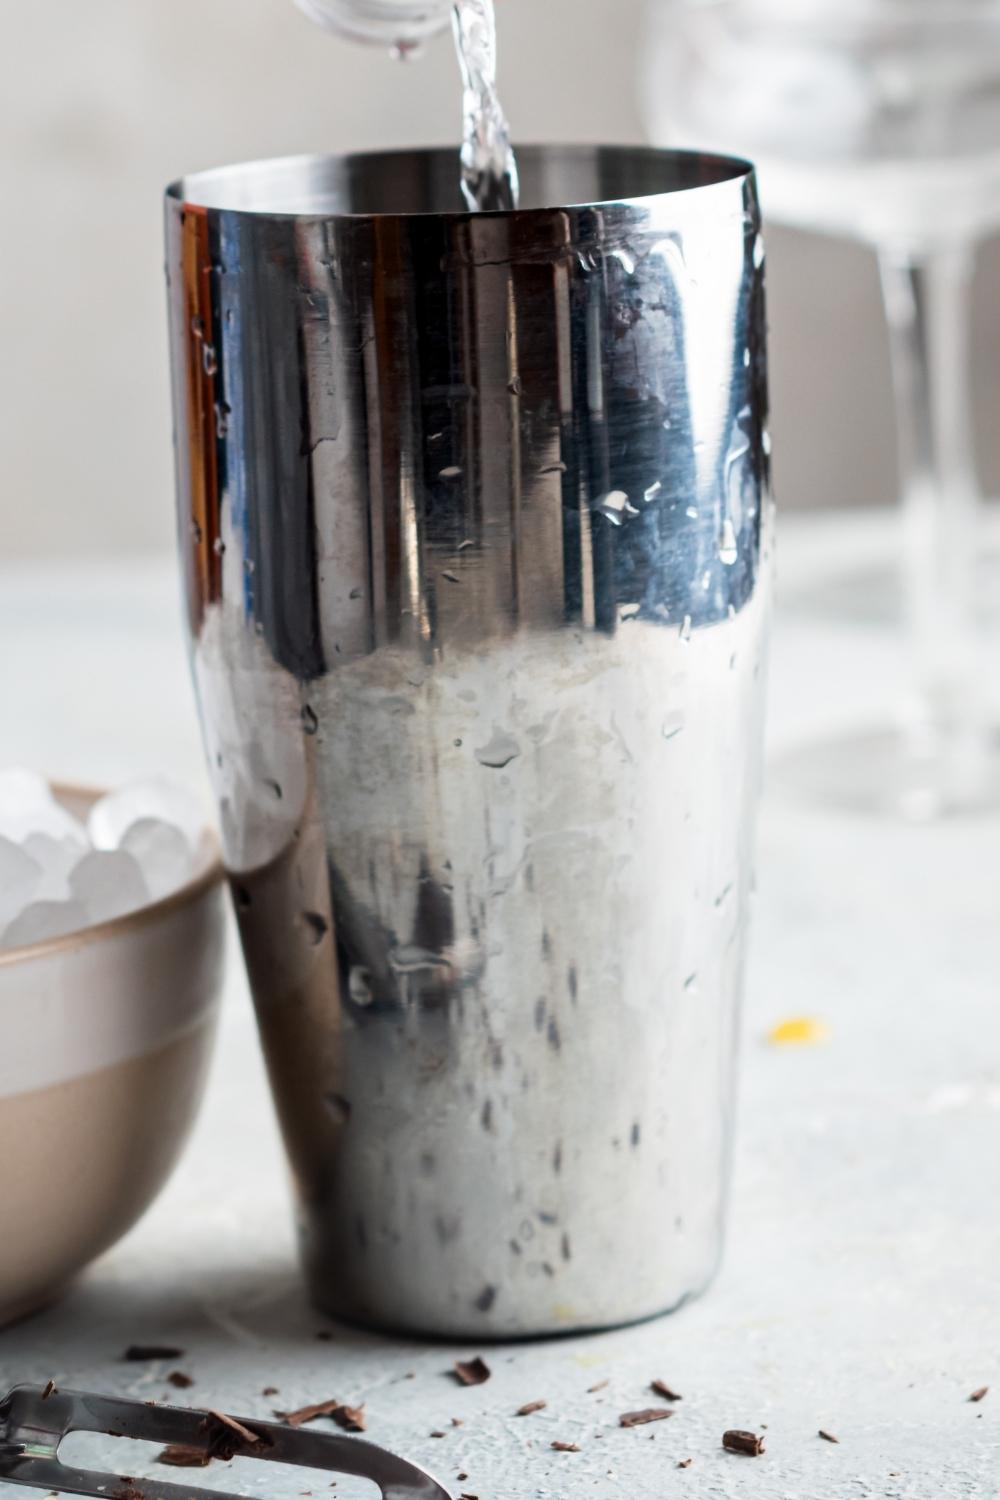 A profile view of a stainless steel cocktail shaker with condensation on the sides and a shot glass full of vodka being poured into it.